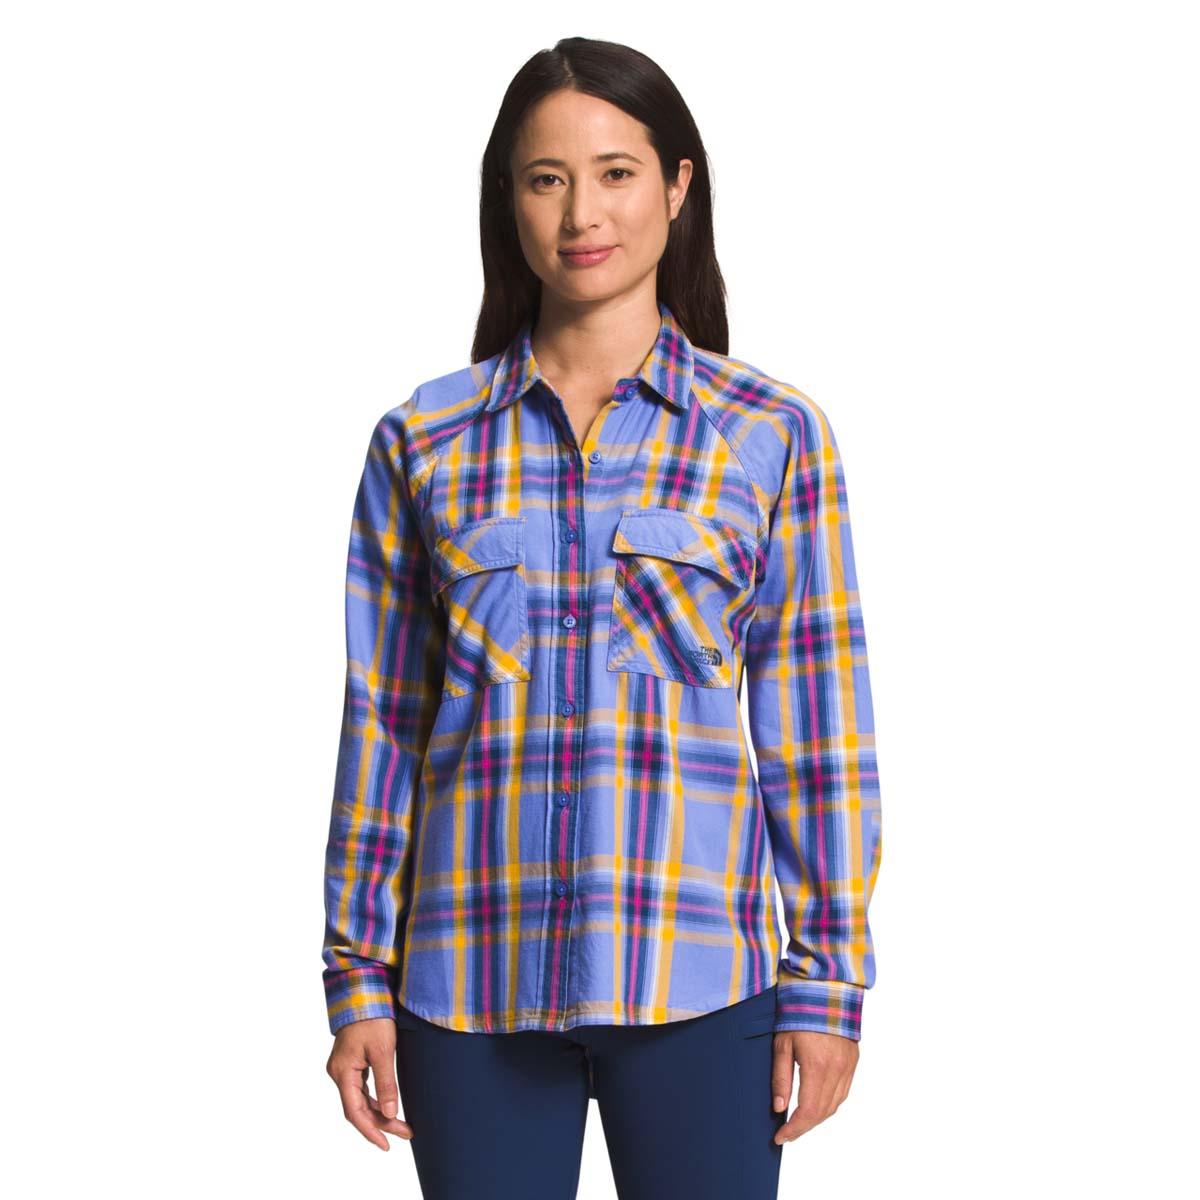 Up To 63% Off on Active Club Women's Flannel P